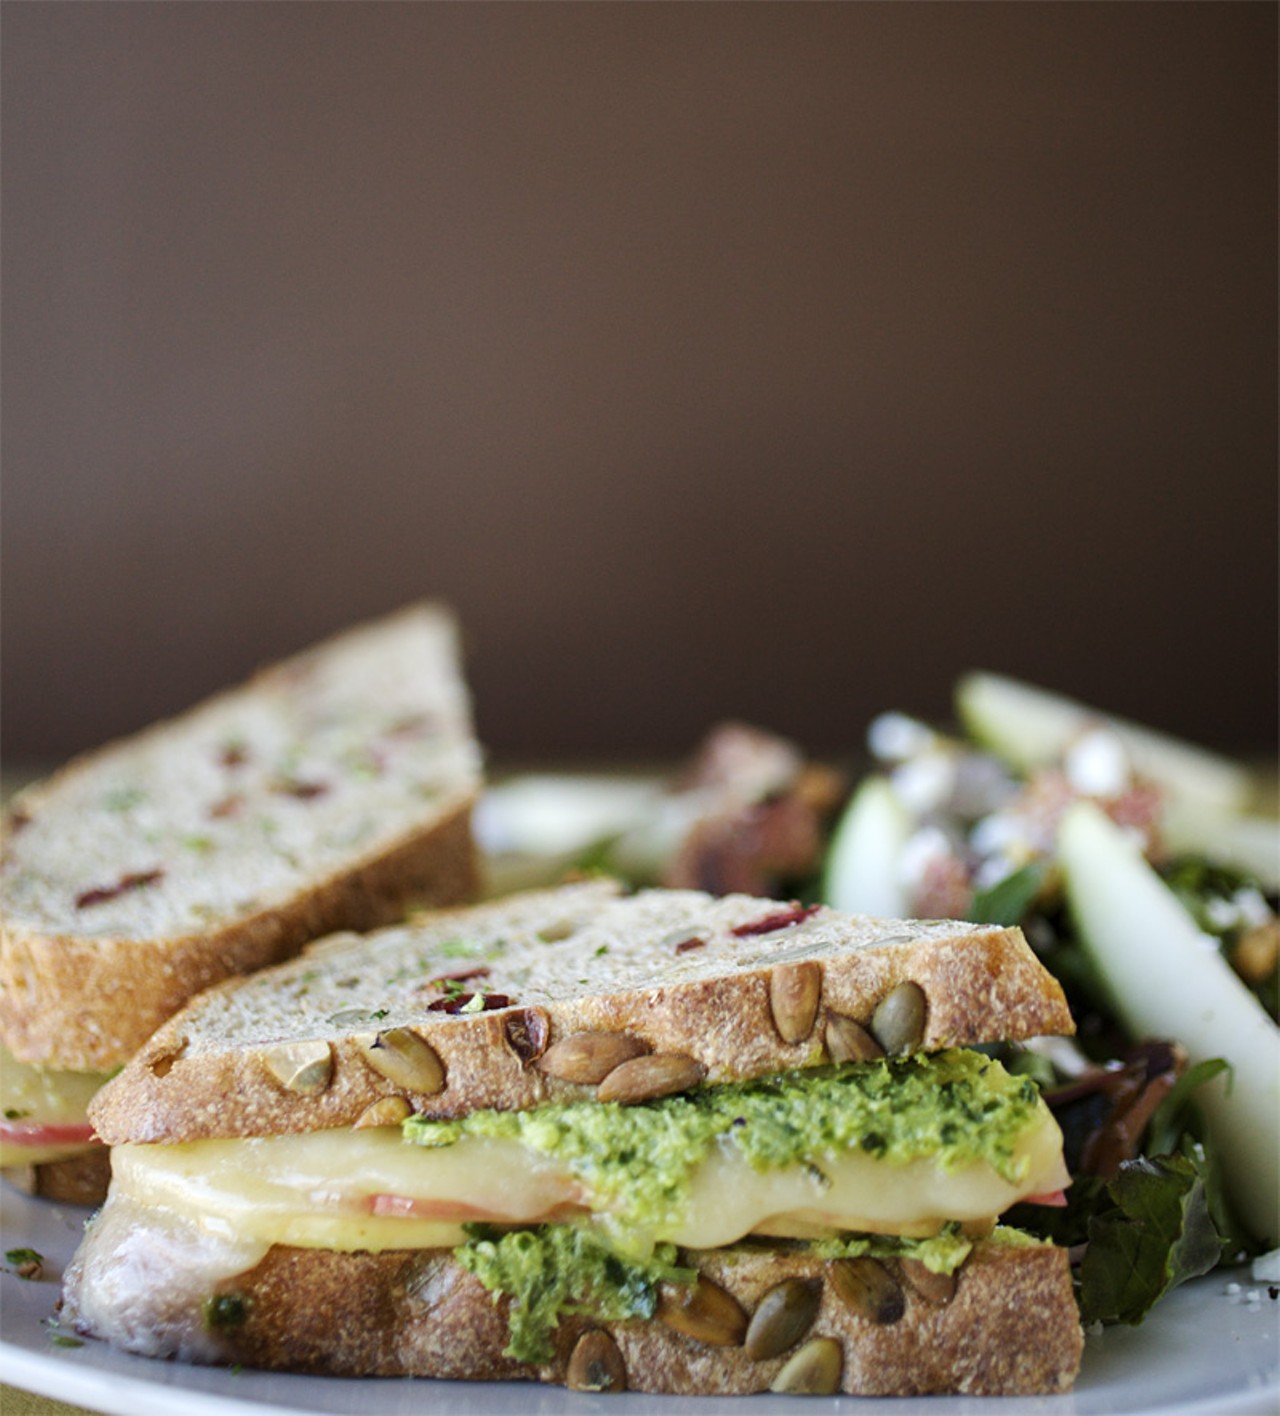 The Orchard Melt sandwich is made with thinly sliced organic apple, creamy havarti and celery pesto grilled on rustic pumpkin bread. Shown here with The Harvest salad.